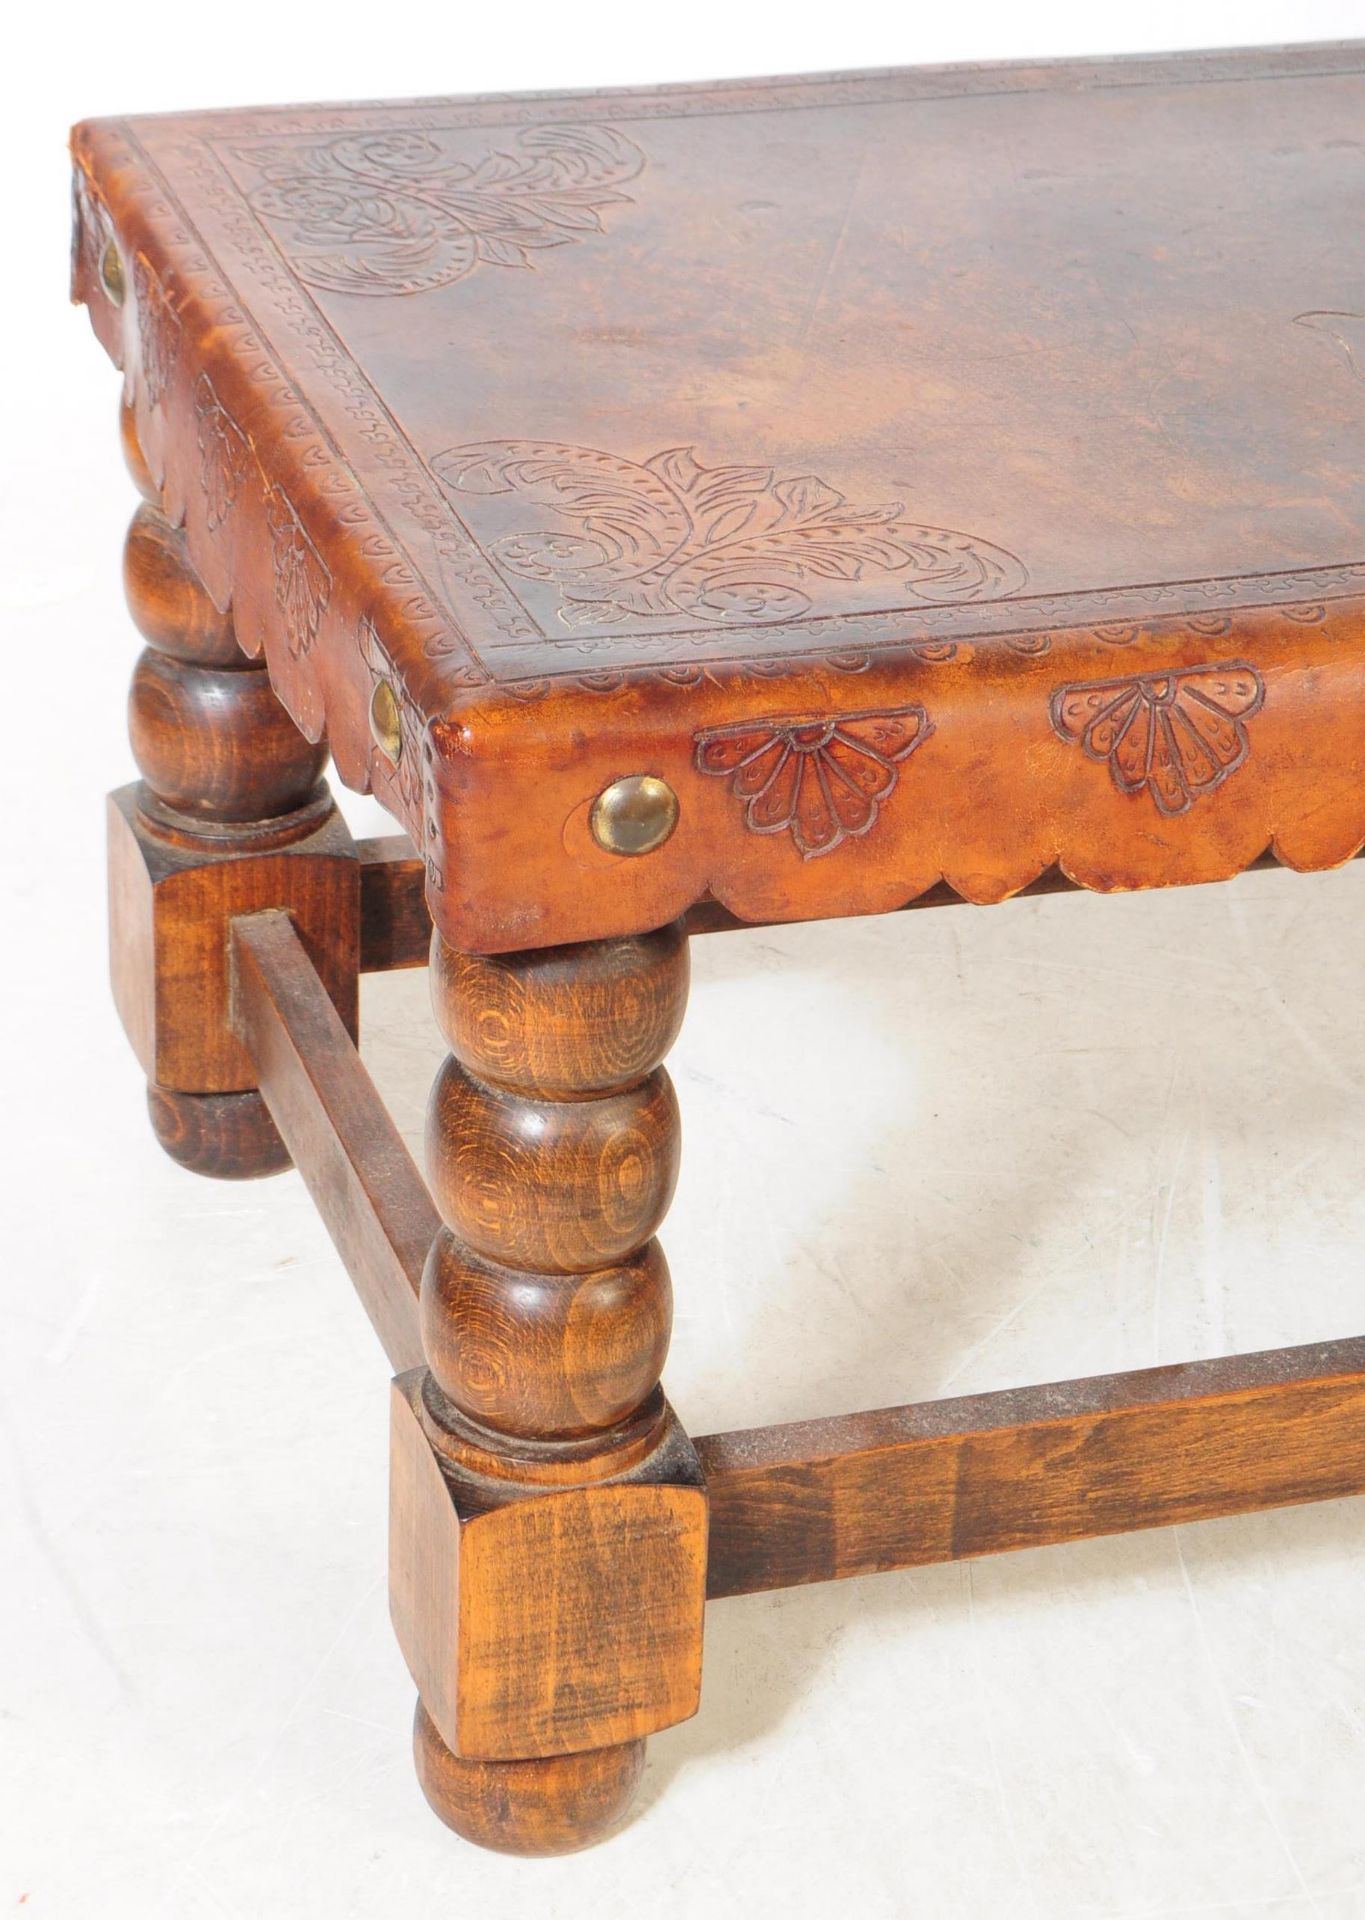 EARLY 20TH CENTURY LEATHER TOPPED OAK COFFEE TABLE - Image 2 of 5